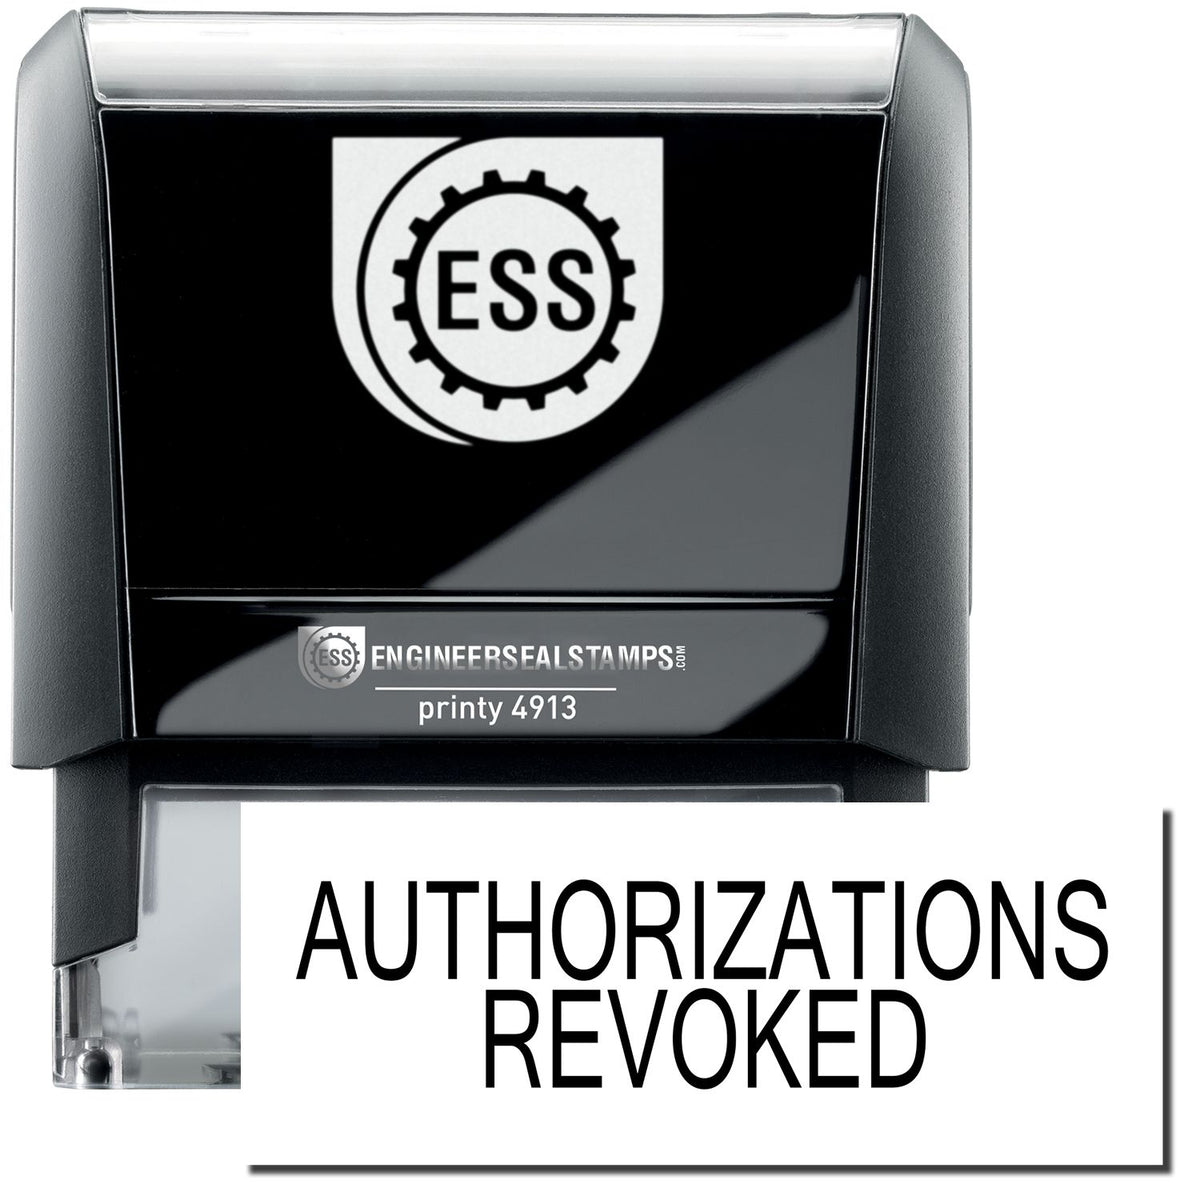 A self-inking stamp with a stamped image showing how the text &quot;AUTHORIZATIONS REVOKED&quot; in a large bold font is displayed by it.